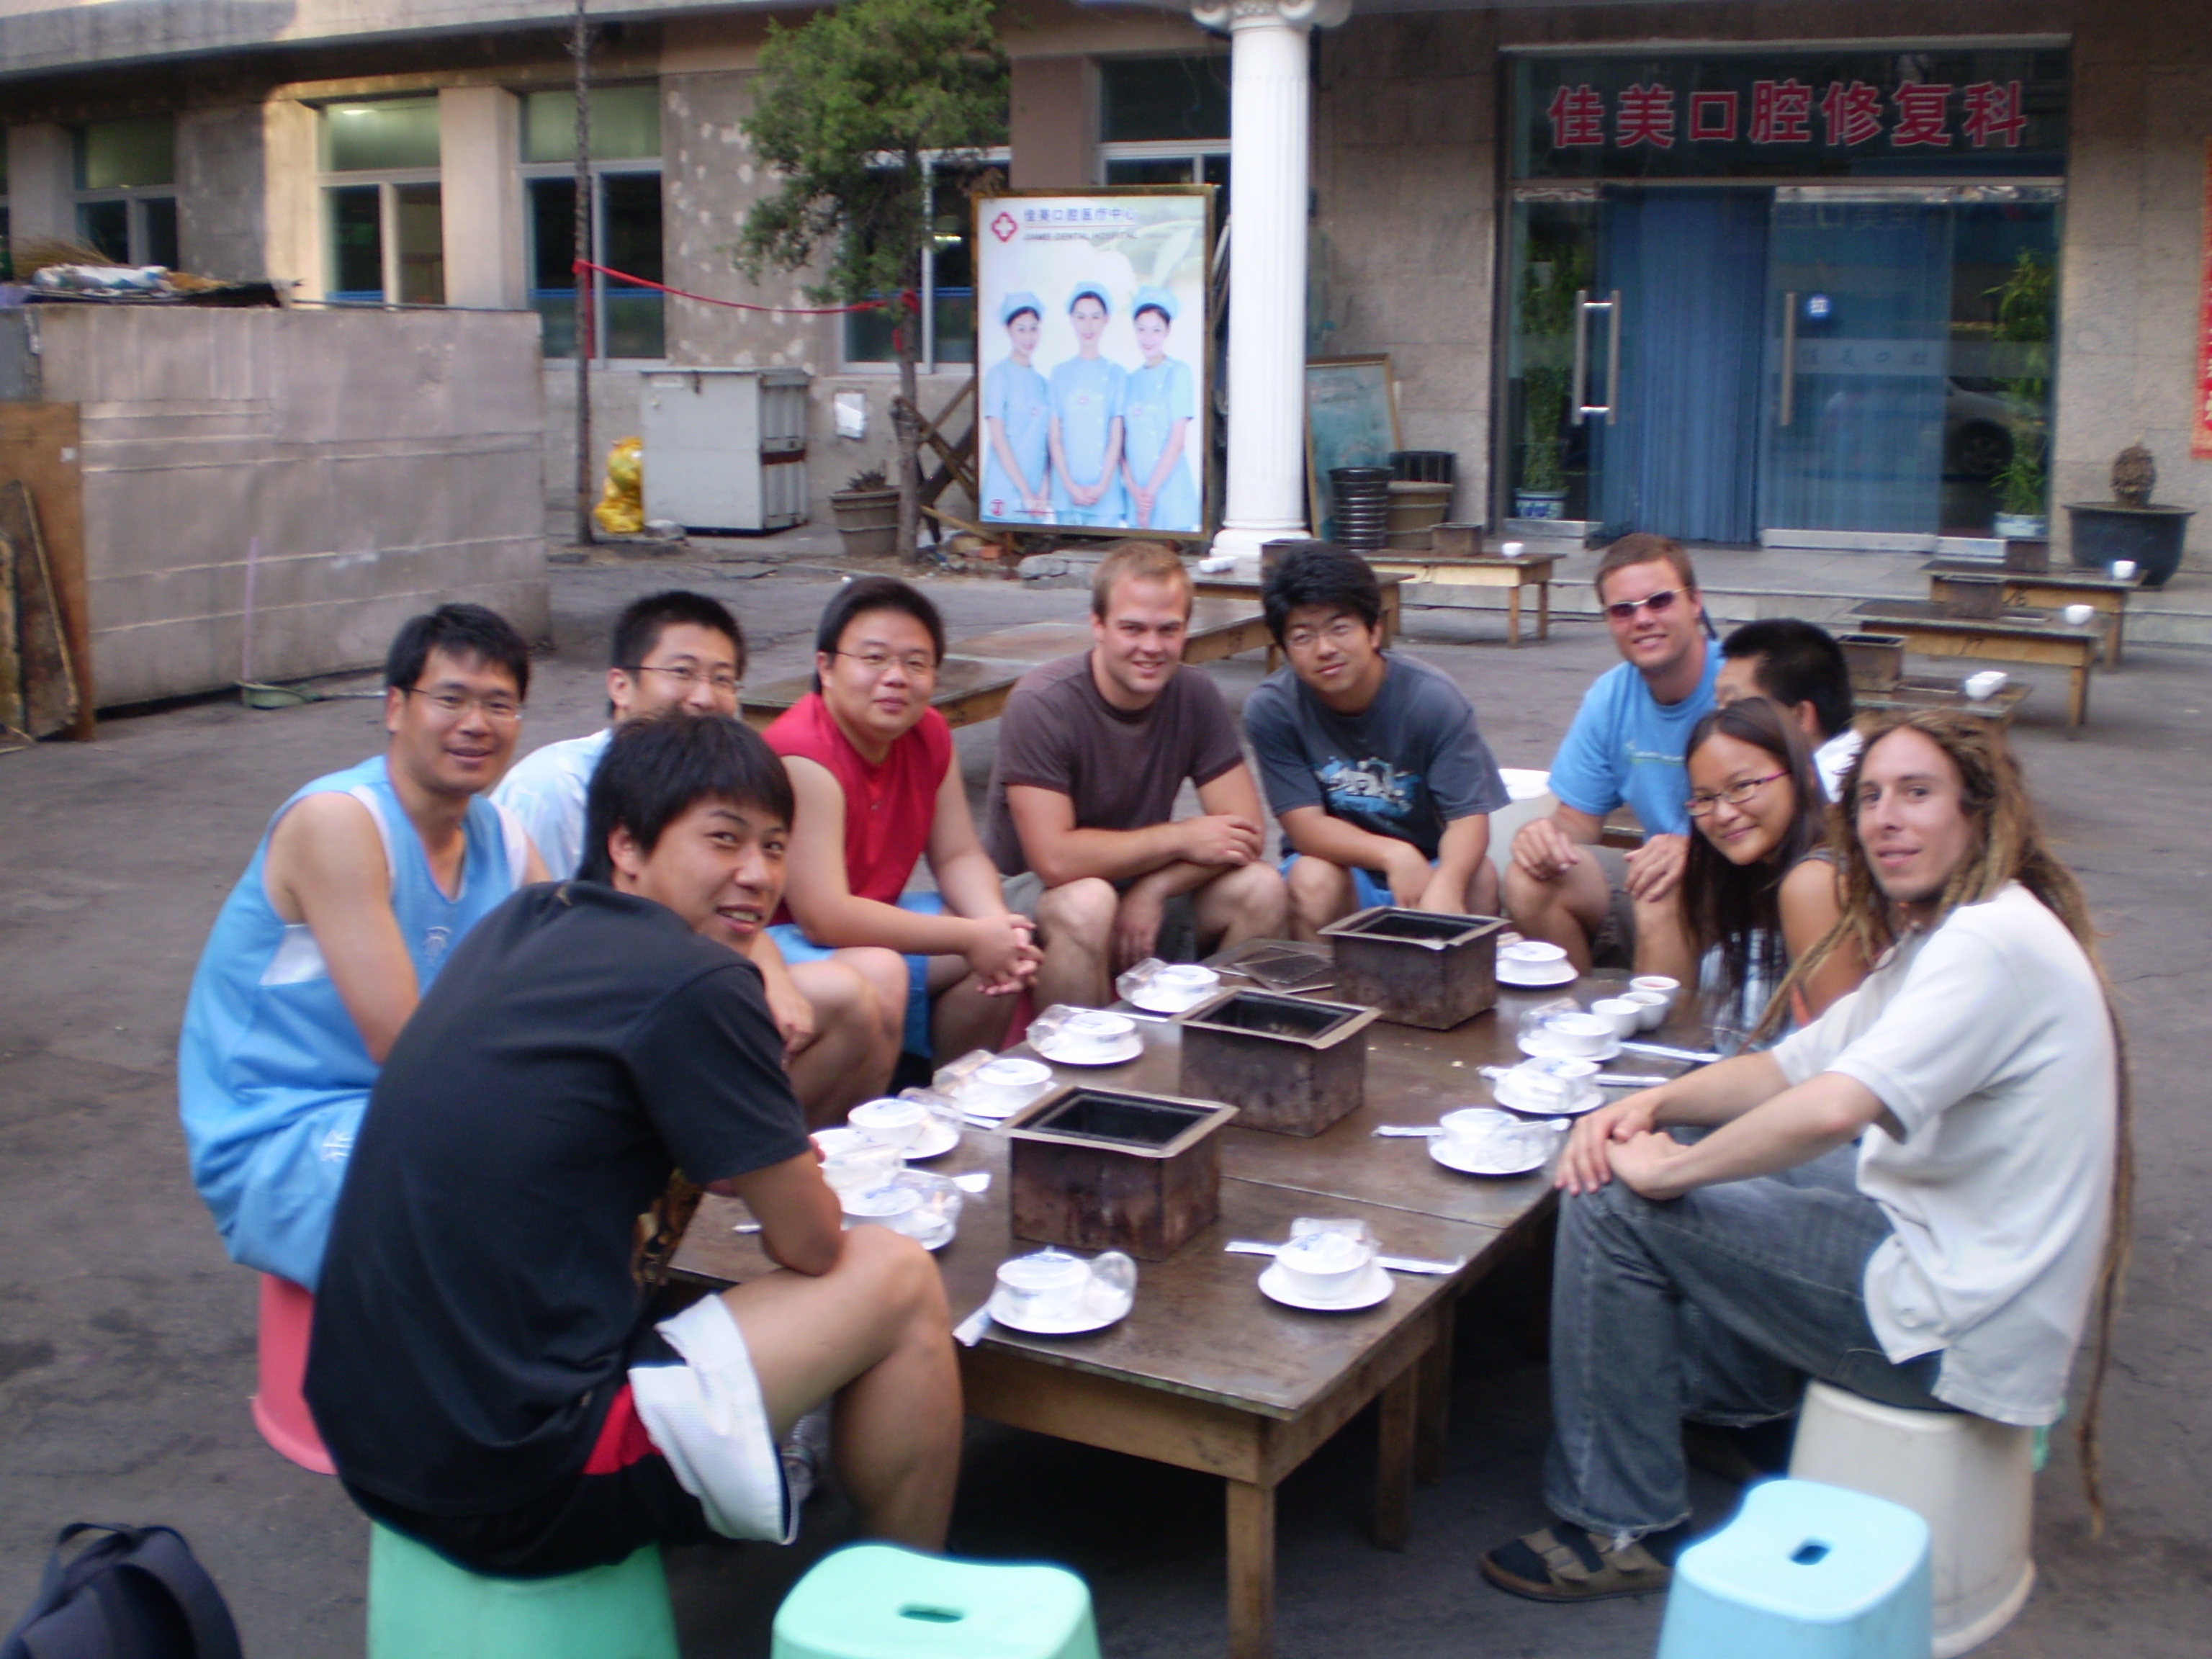 UCSB students in China.